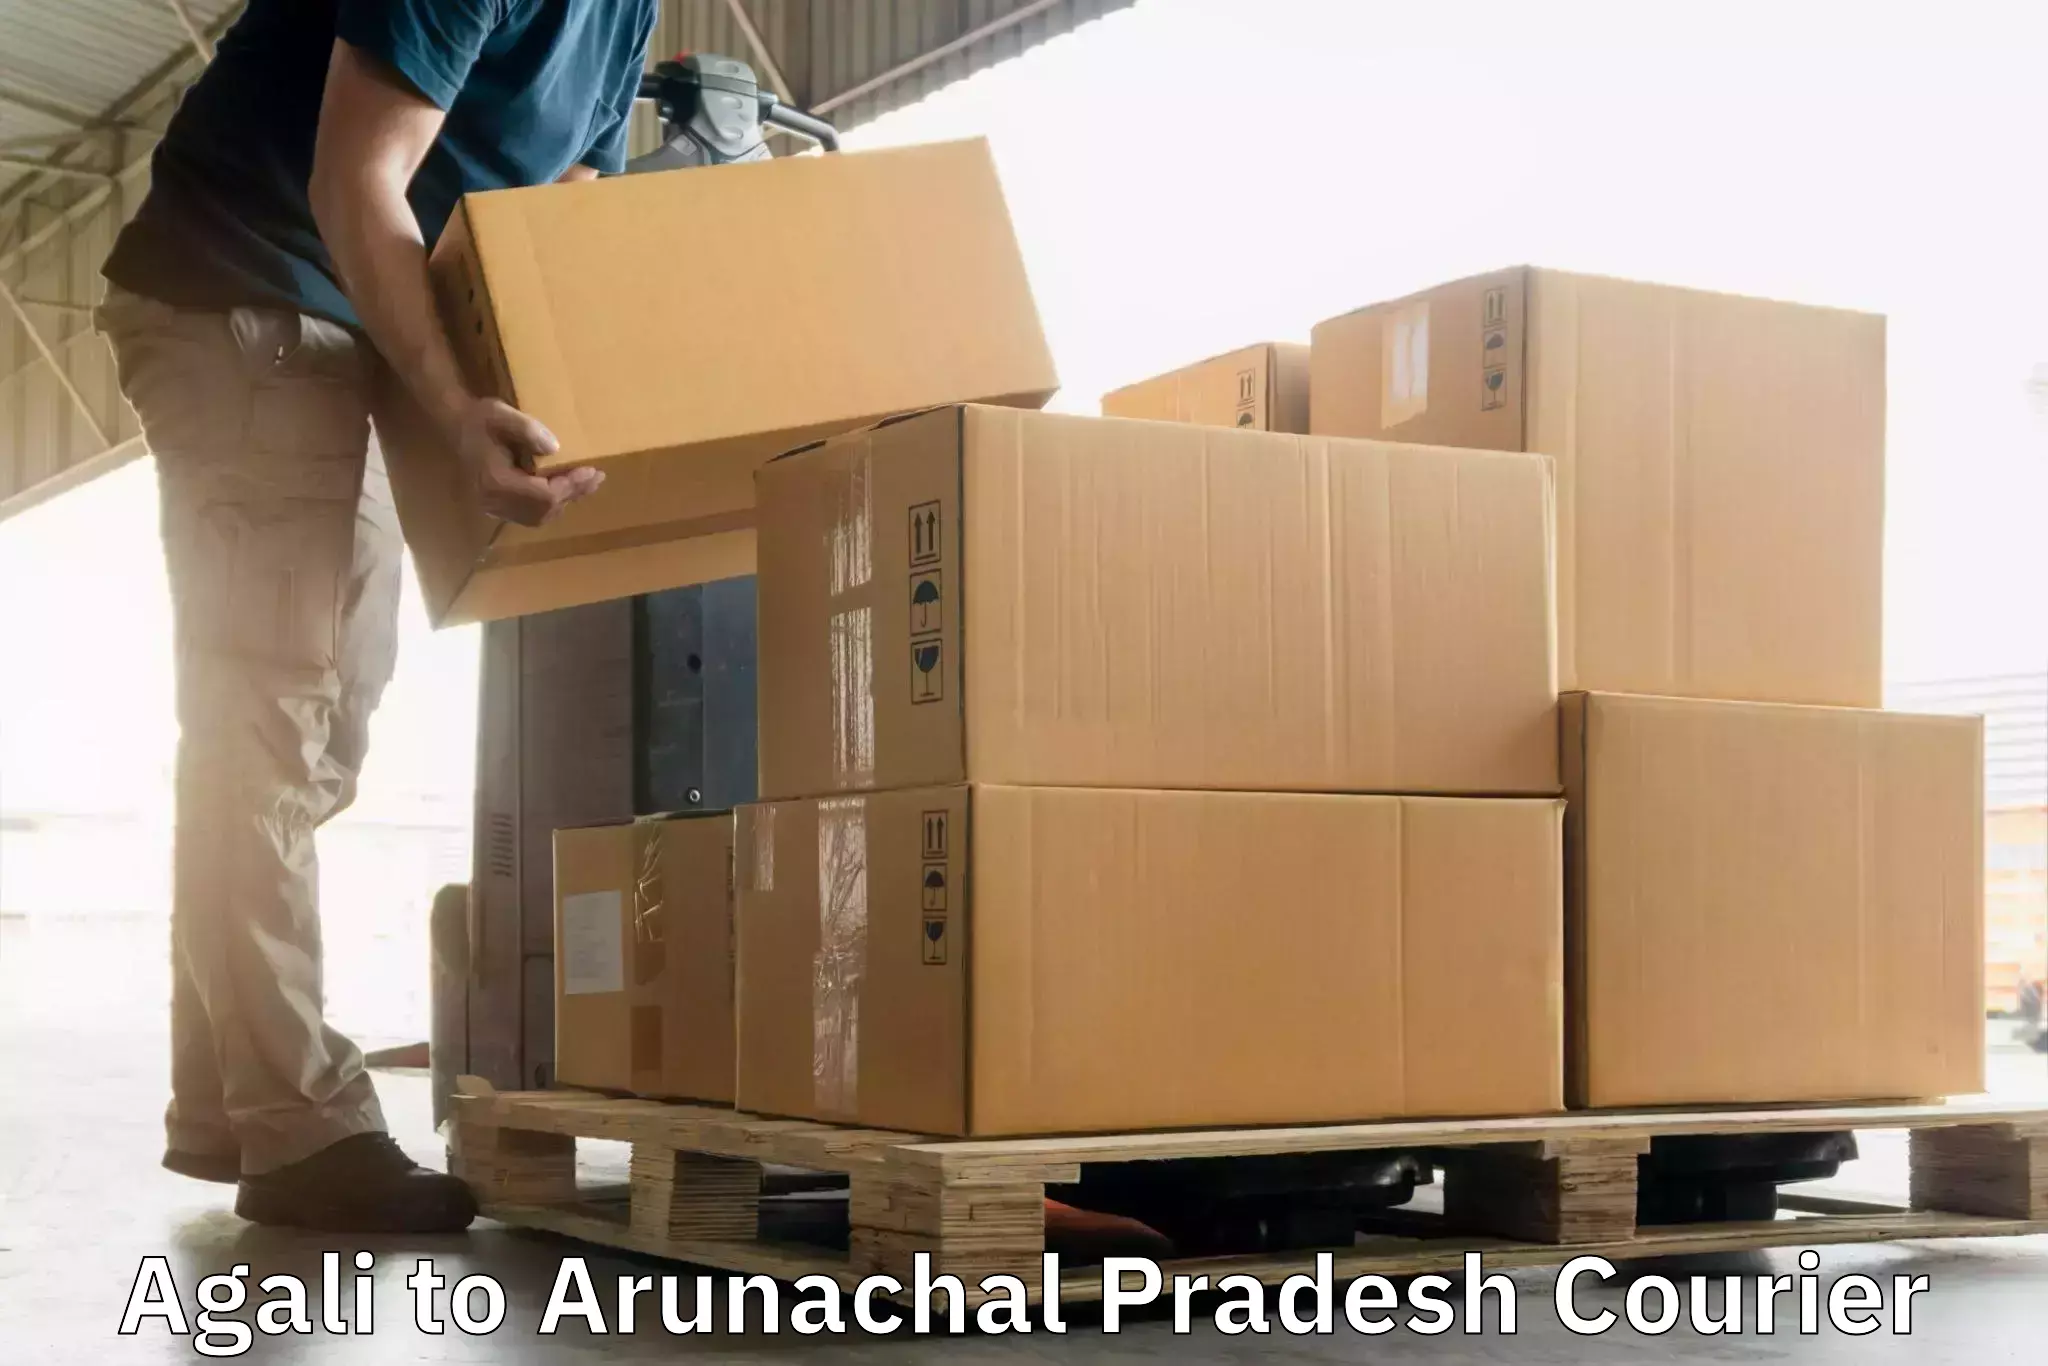 Modern courier technology in Agali to Dirang